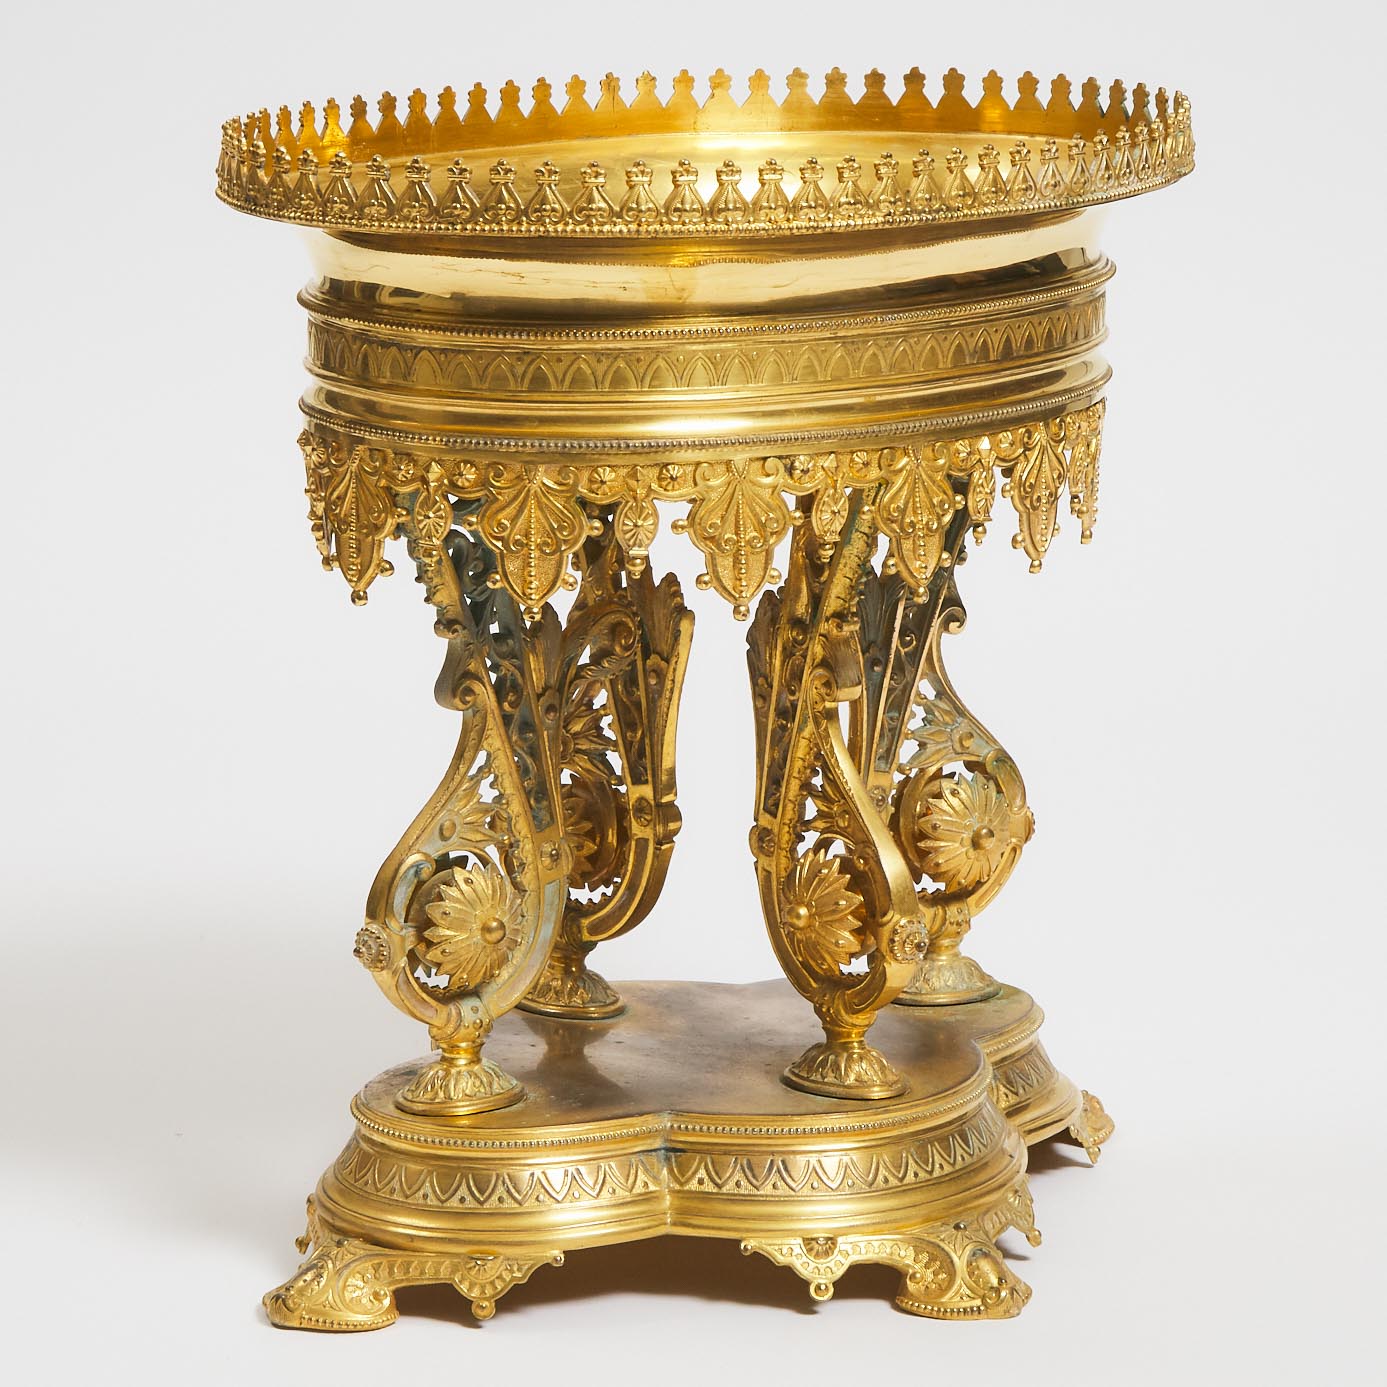 English Aesthetic Movement Gilt Bronze Oval Centrepiece Stand, c.1870